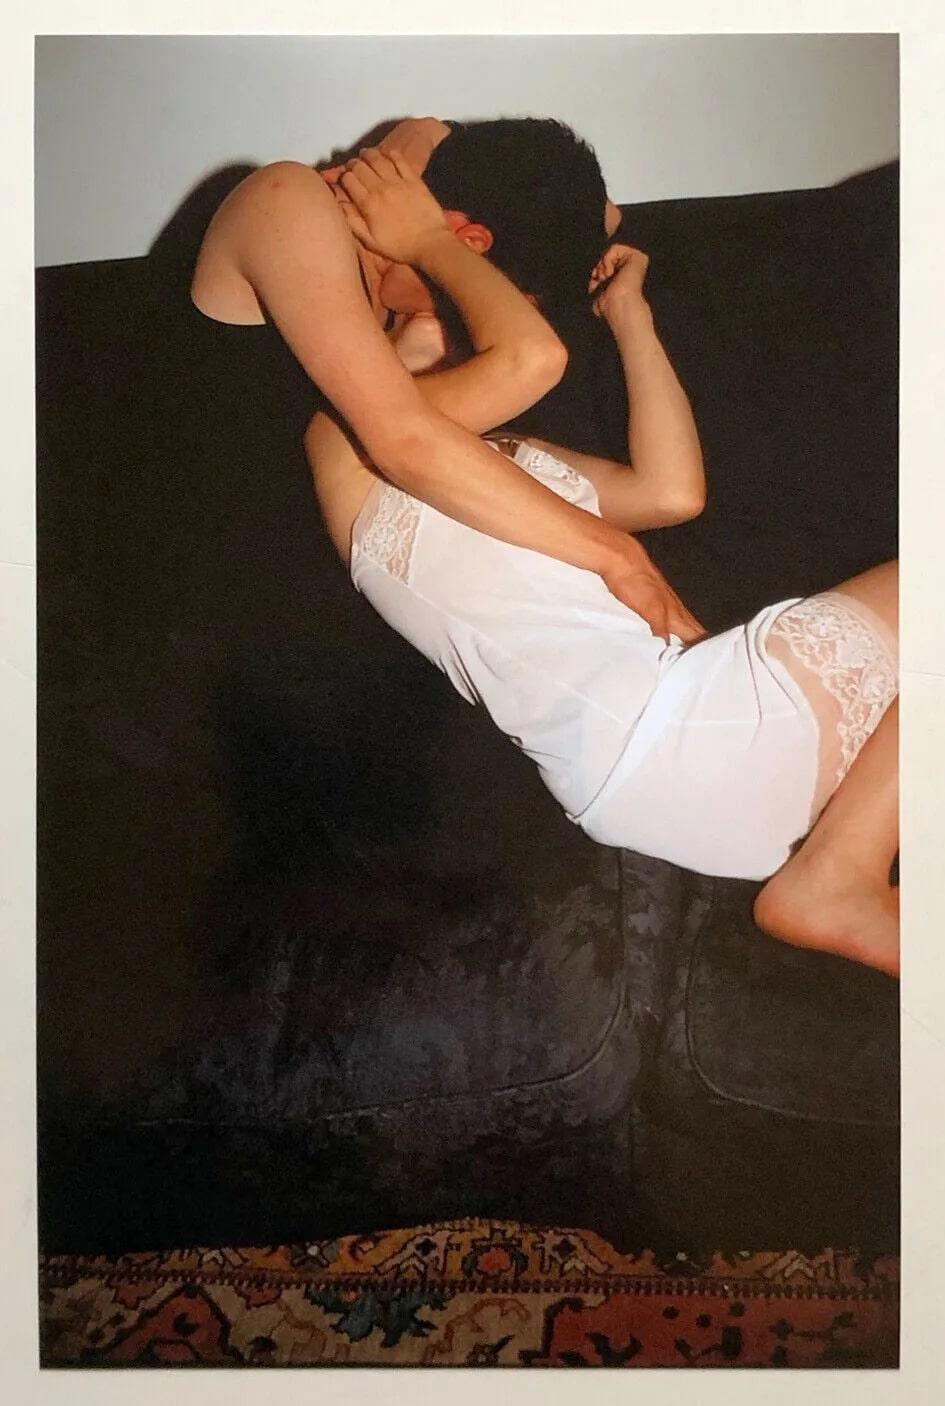 By Nan Goldin

Swan-Like Embrace, Paris (2001), printed later, 2021
C-Print on paper
8 x 5 1/8 inches
Signed verso (please see image 3)
From the 2021 timed release, published by Pain.
